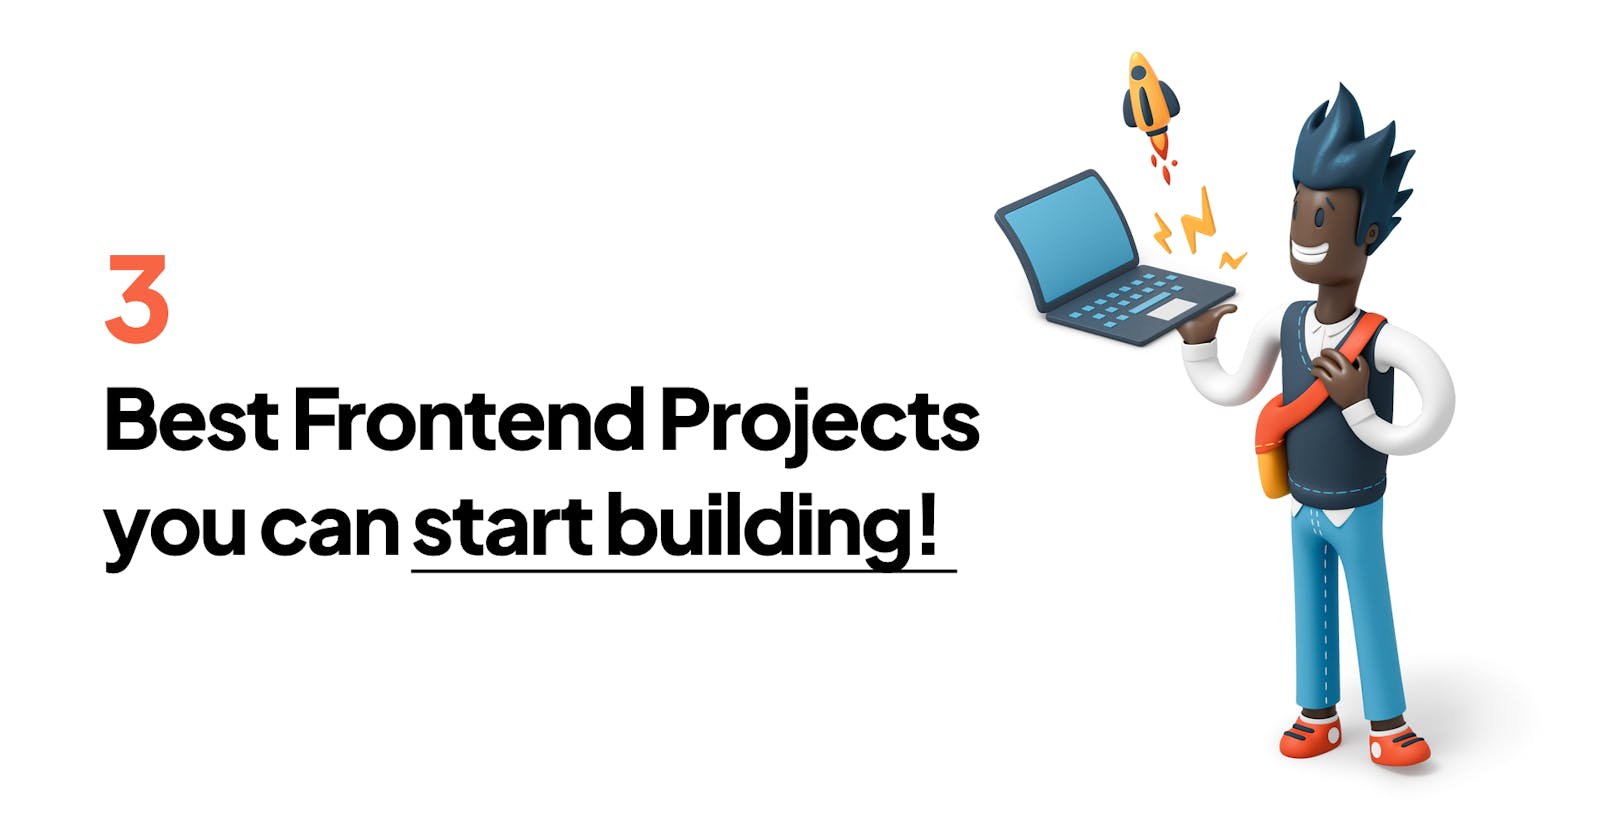 Best Frontend projects you can start building! 🙌